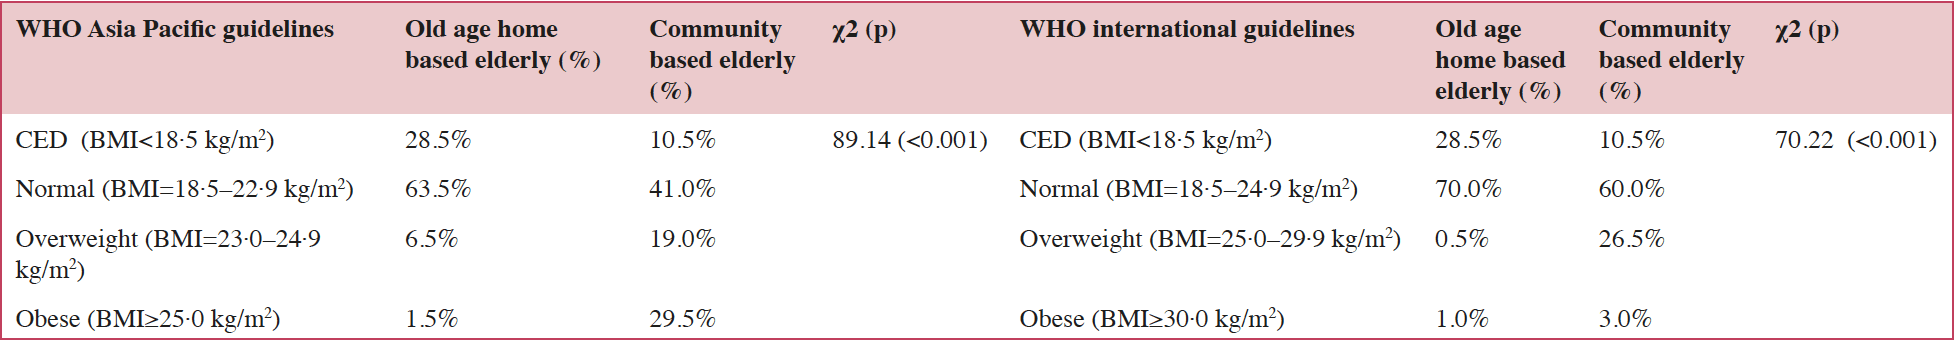 Table 3. Distribution of old age home based and community based elderly according to BMI with respect to WHO Asia Pacific and WHO international guidelines